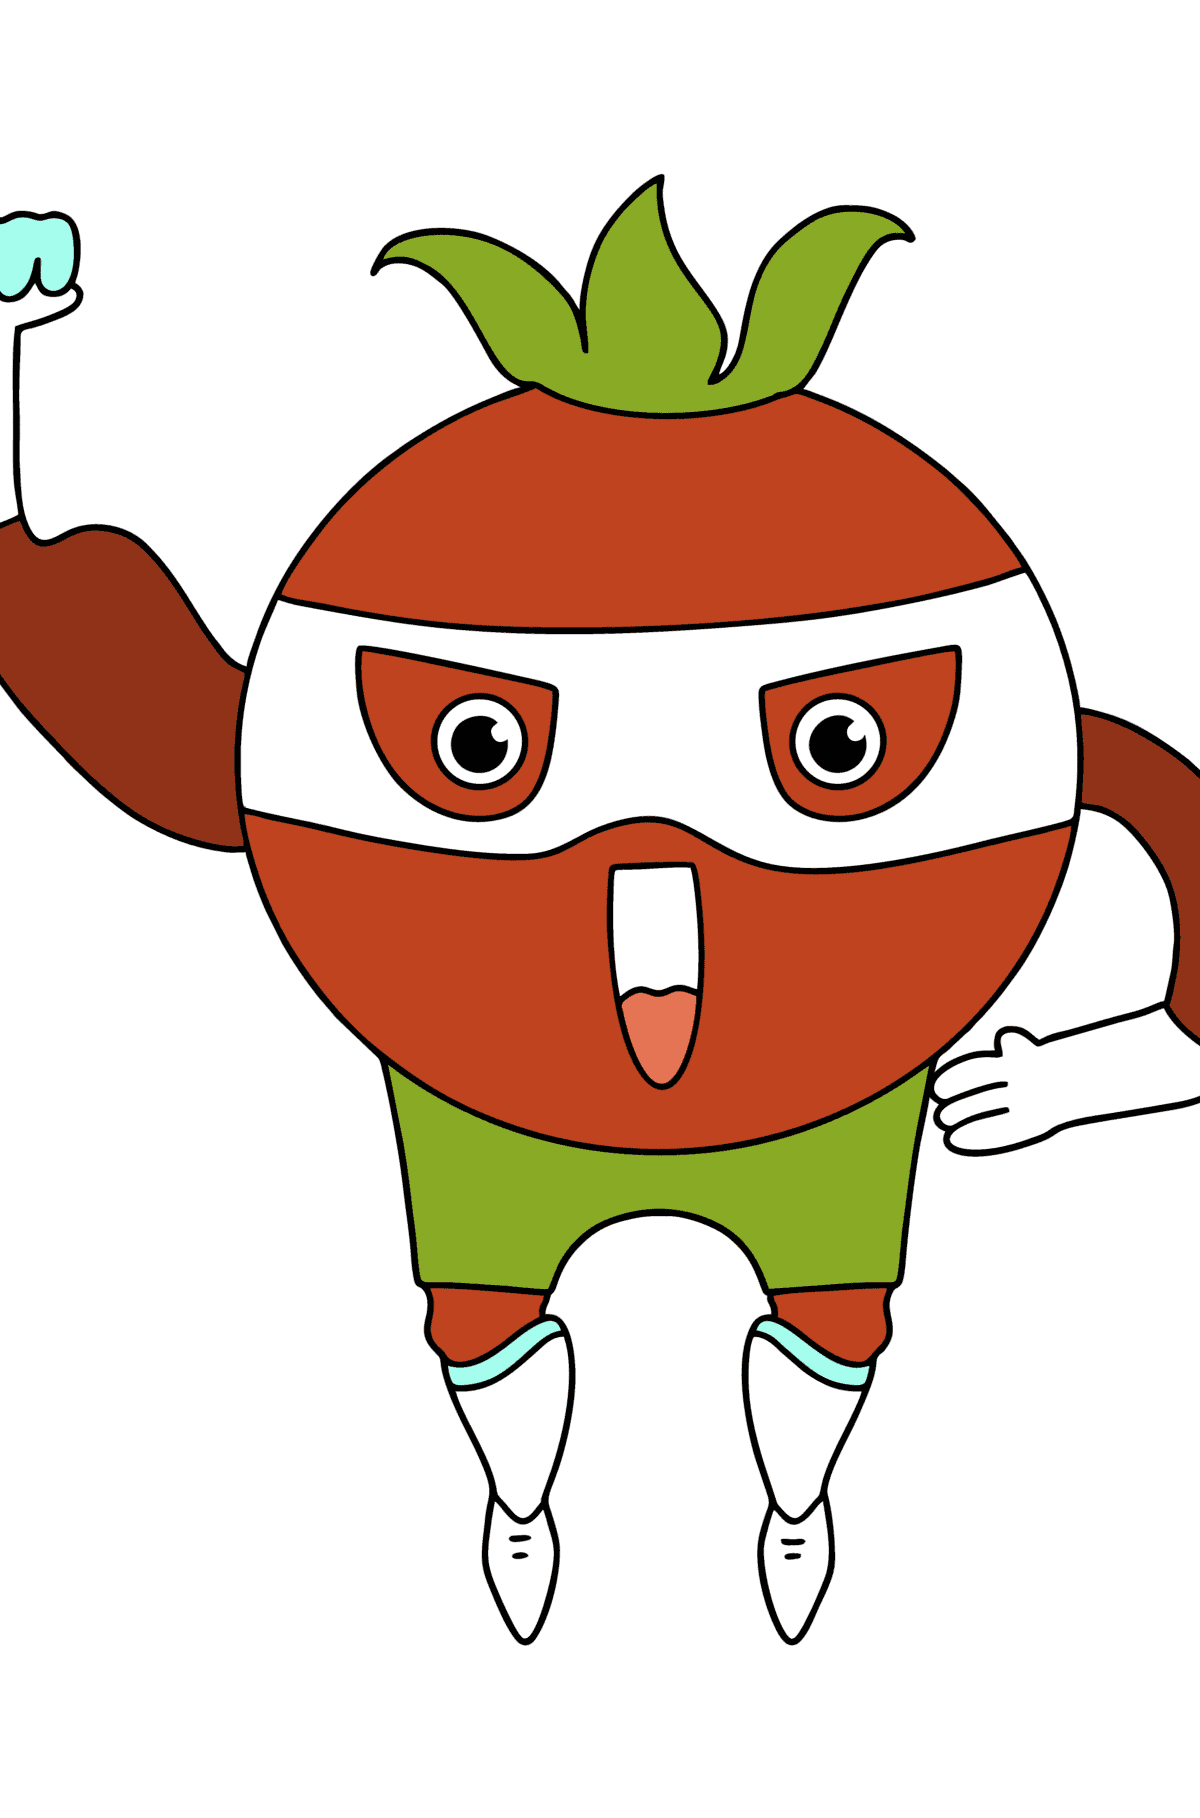 Brave tomato сoloring page - Coloring Pages for Kids